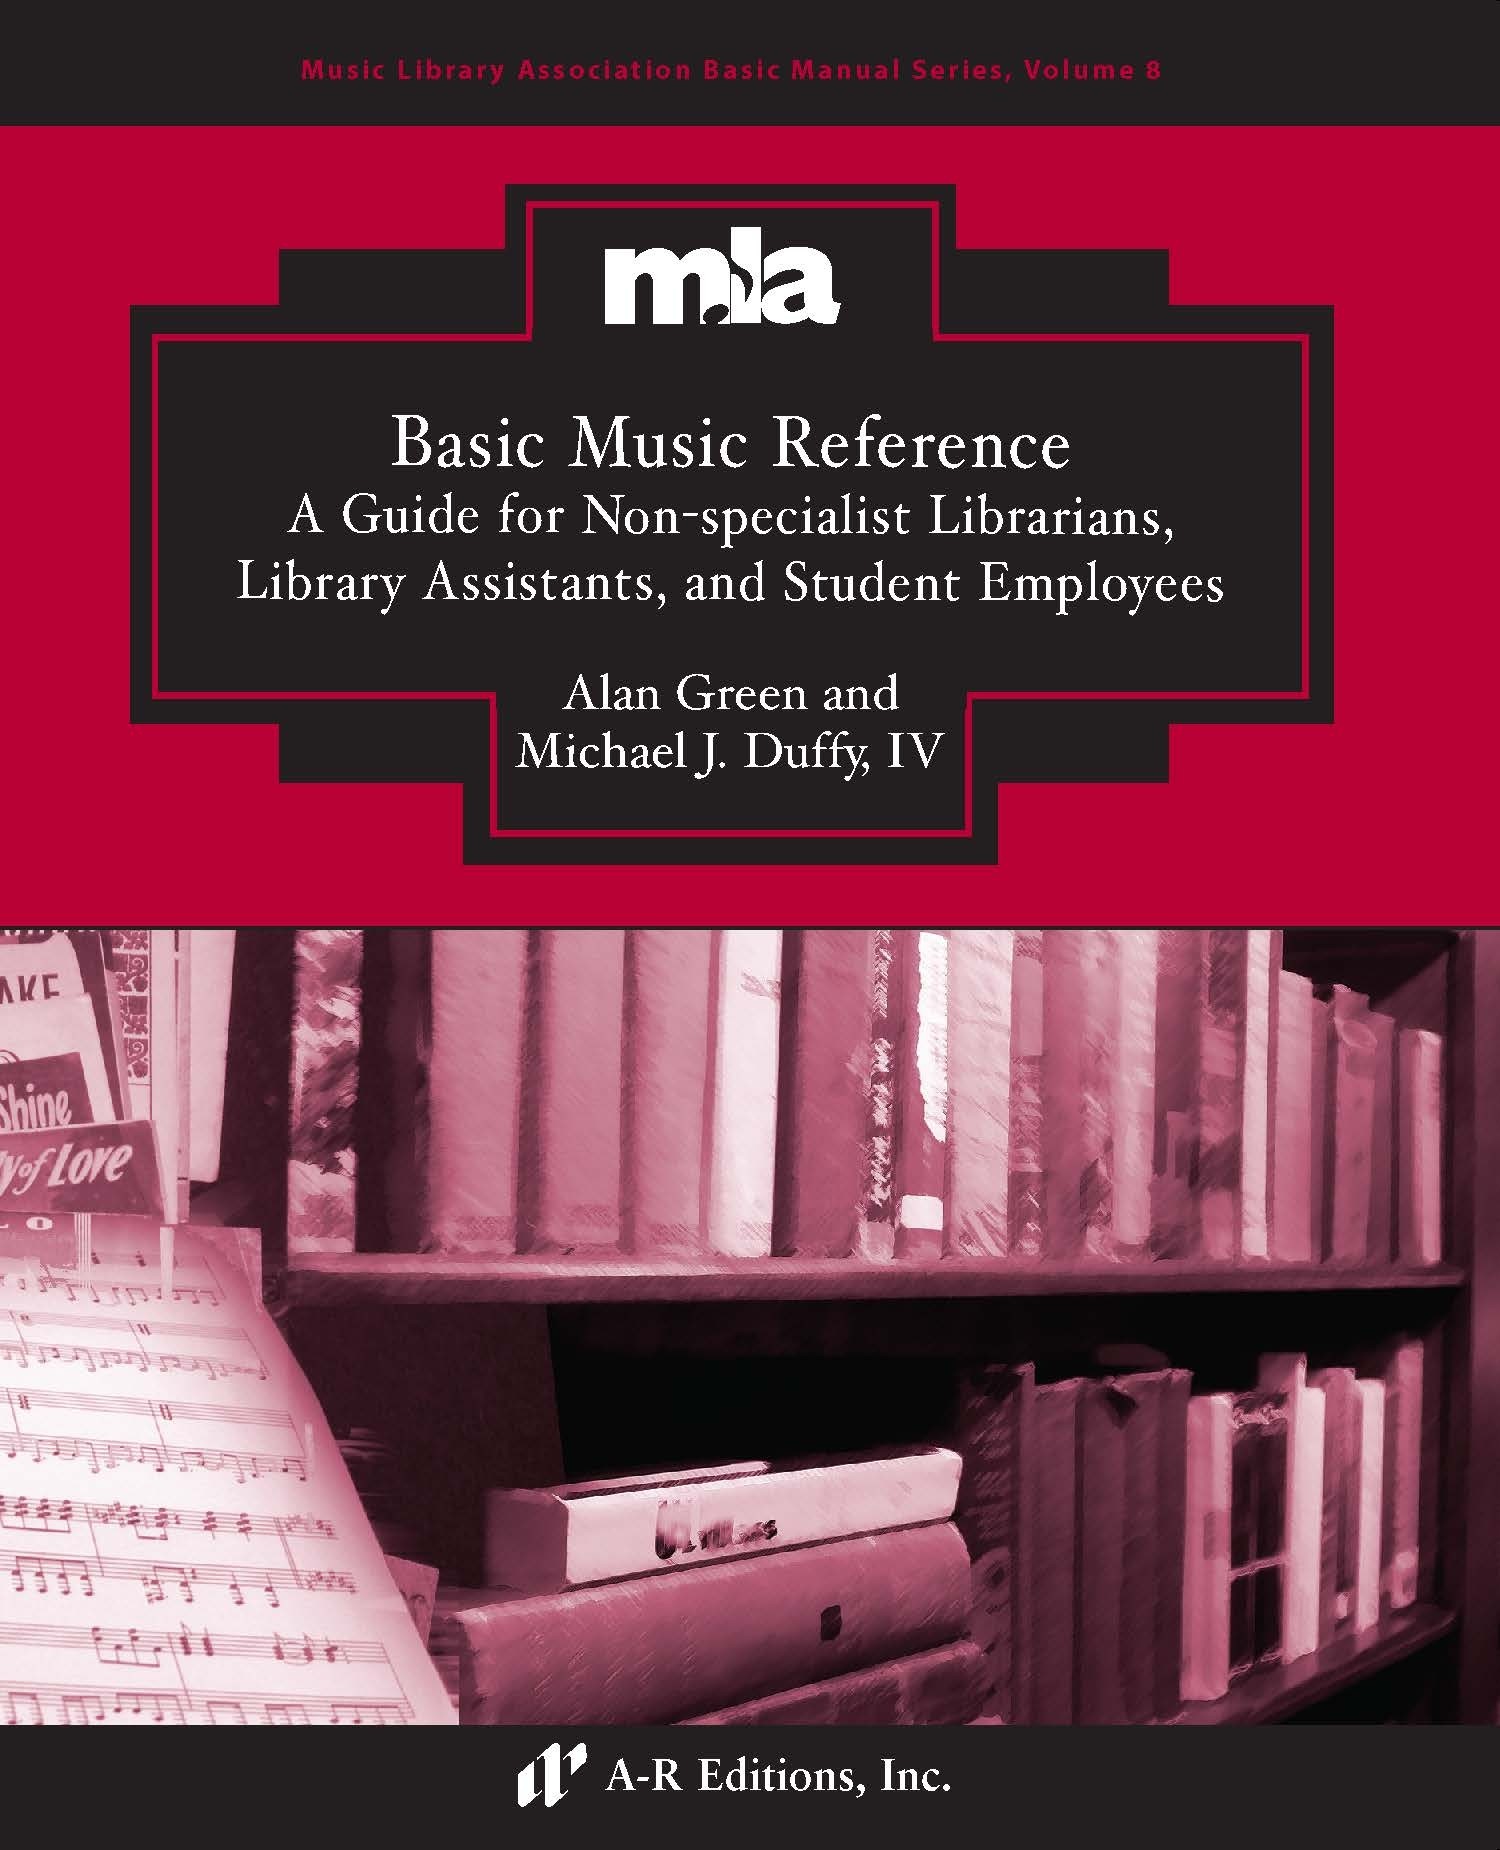 You are currently viewing Basic Music Reference: a Guide for Non-specialist Librarians, Library Assistants, and Student Employees